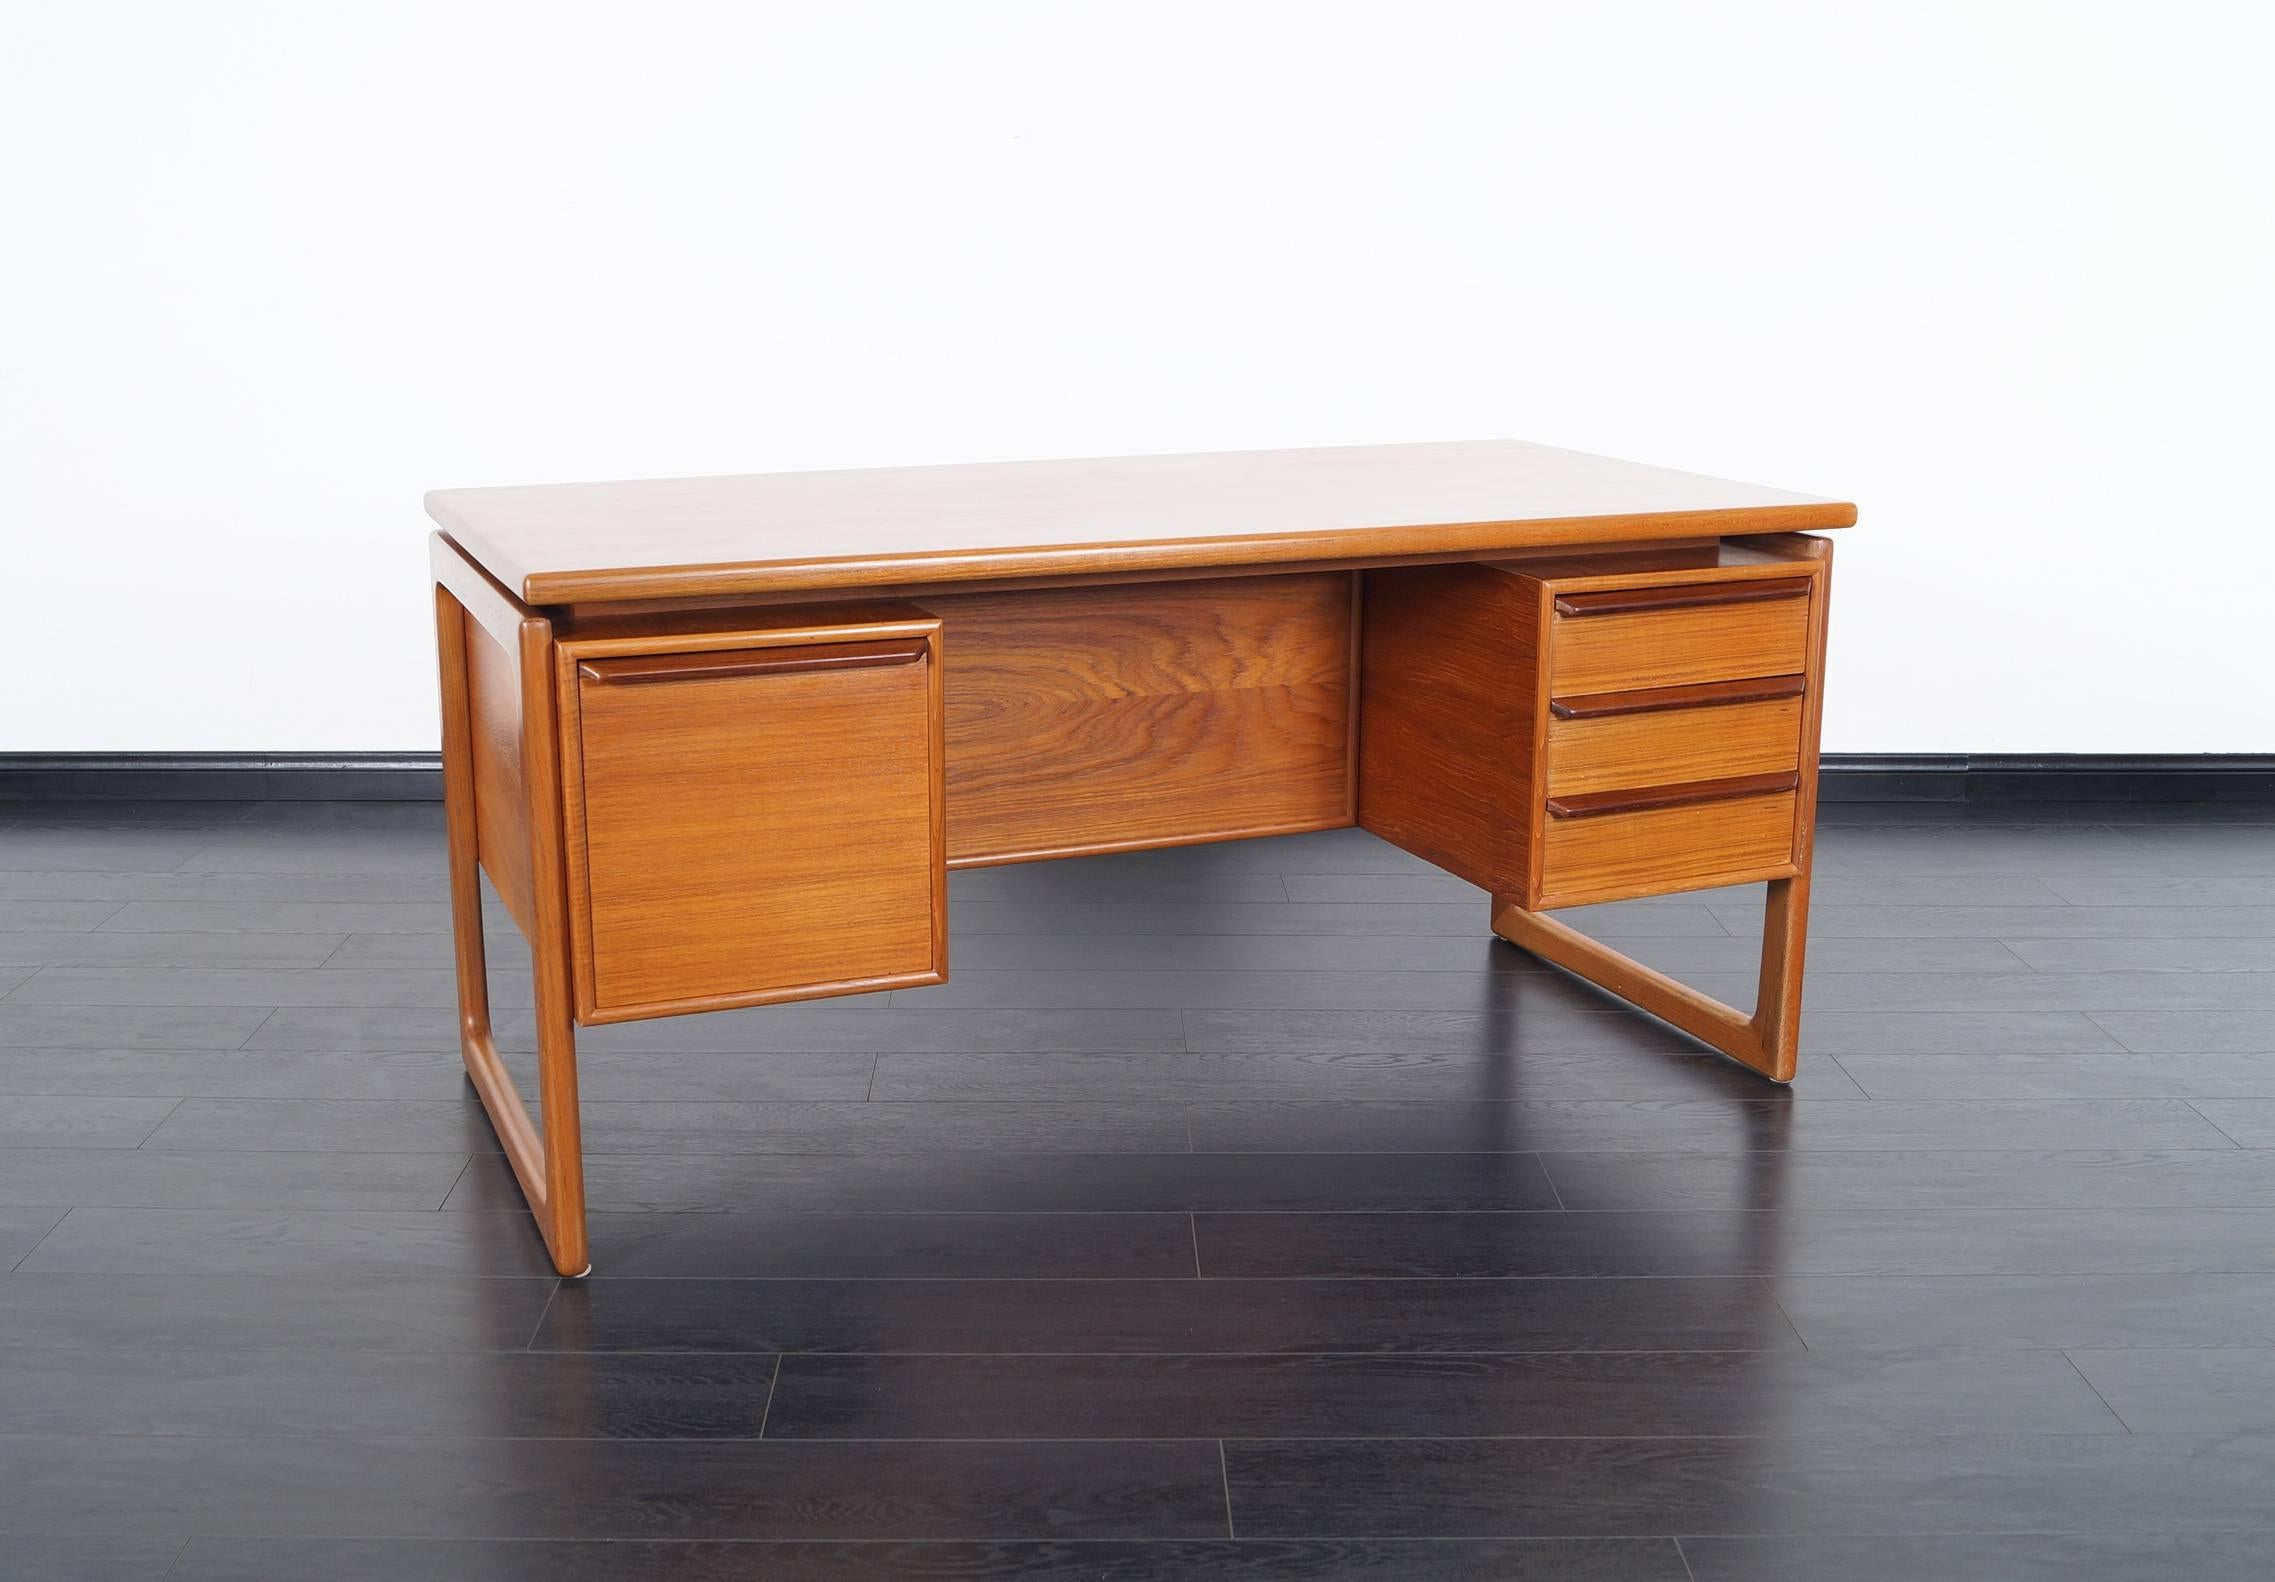 Danish modern teak desk, features three drawers on the right side and one file cabinet on the left side. A rear storage space for display.